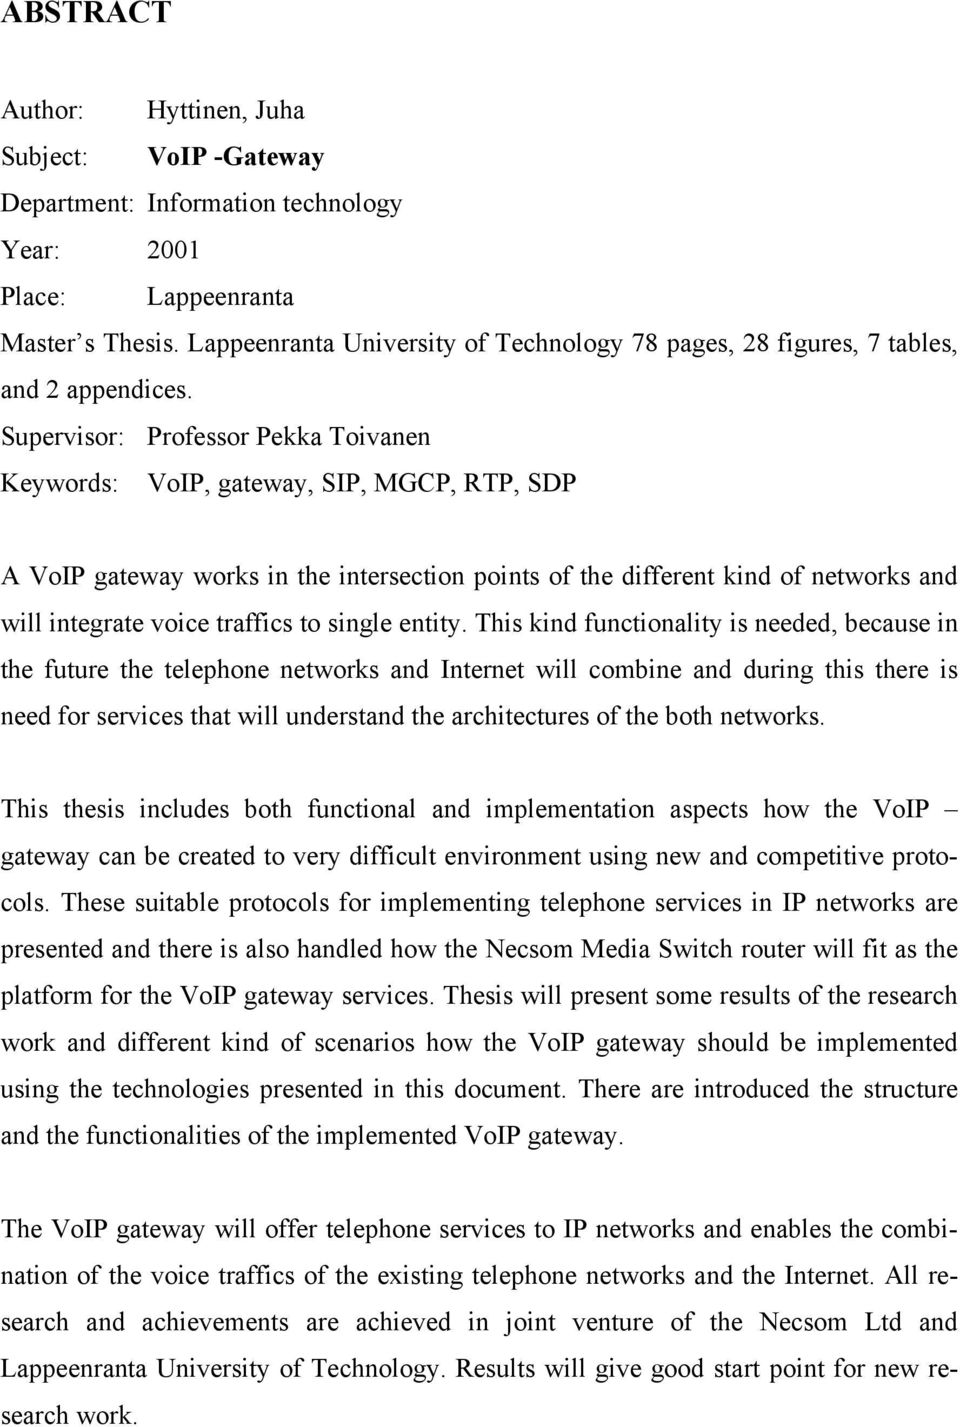 Supervisor: Professor Pekka Toivanen Keywords: VoIP, gateway, SIP, MGCP, RTP, SDP A VoIP gateway works in the intersection points of the different kind of networks and will integrate voice traffics